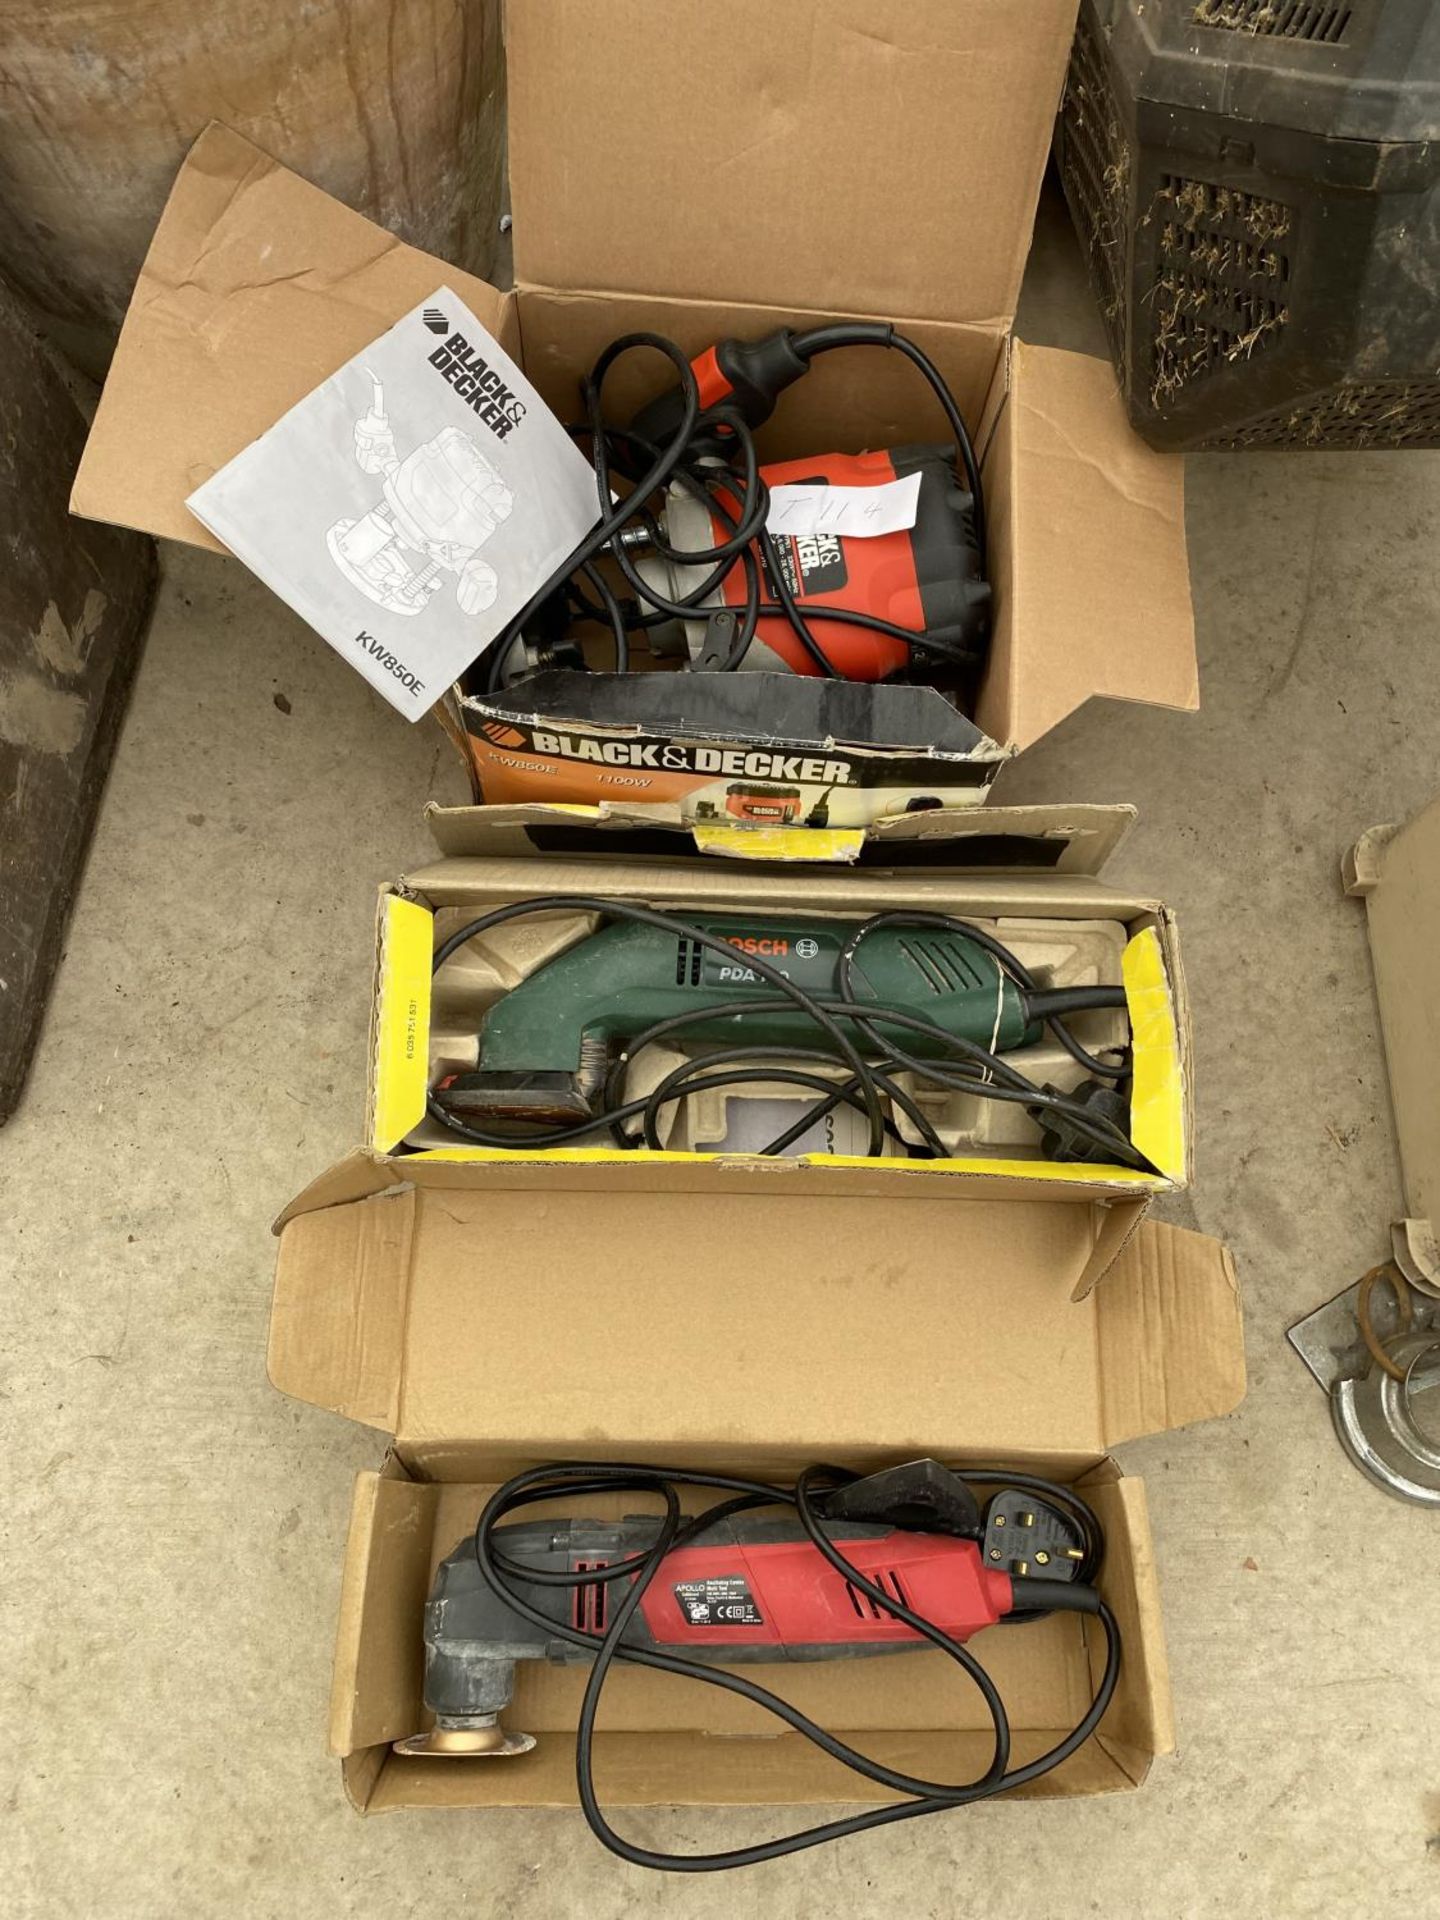 AN ASSORTMENT OF POWER TOOLS TO INCLUDE A BLACK AND DECKER ROUTER AND A BOACH DETAIL SANDER ETC